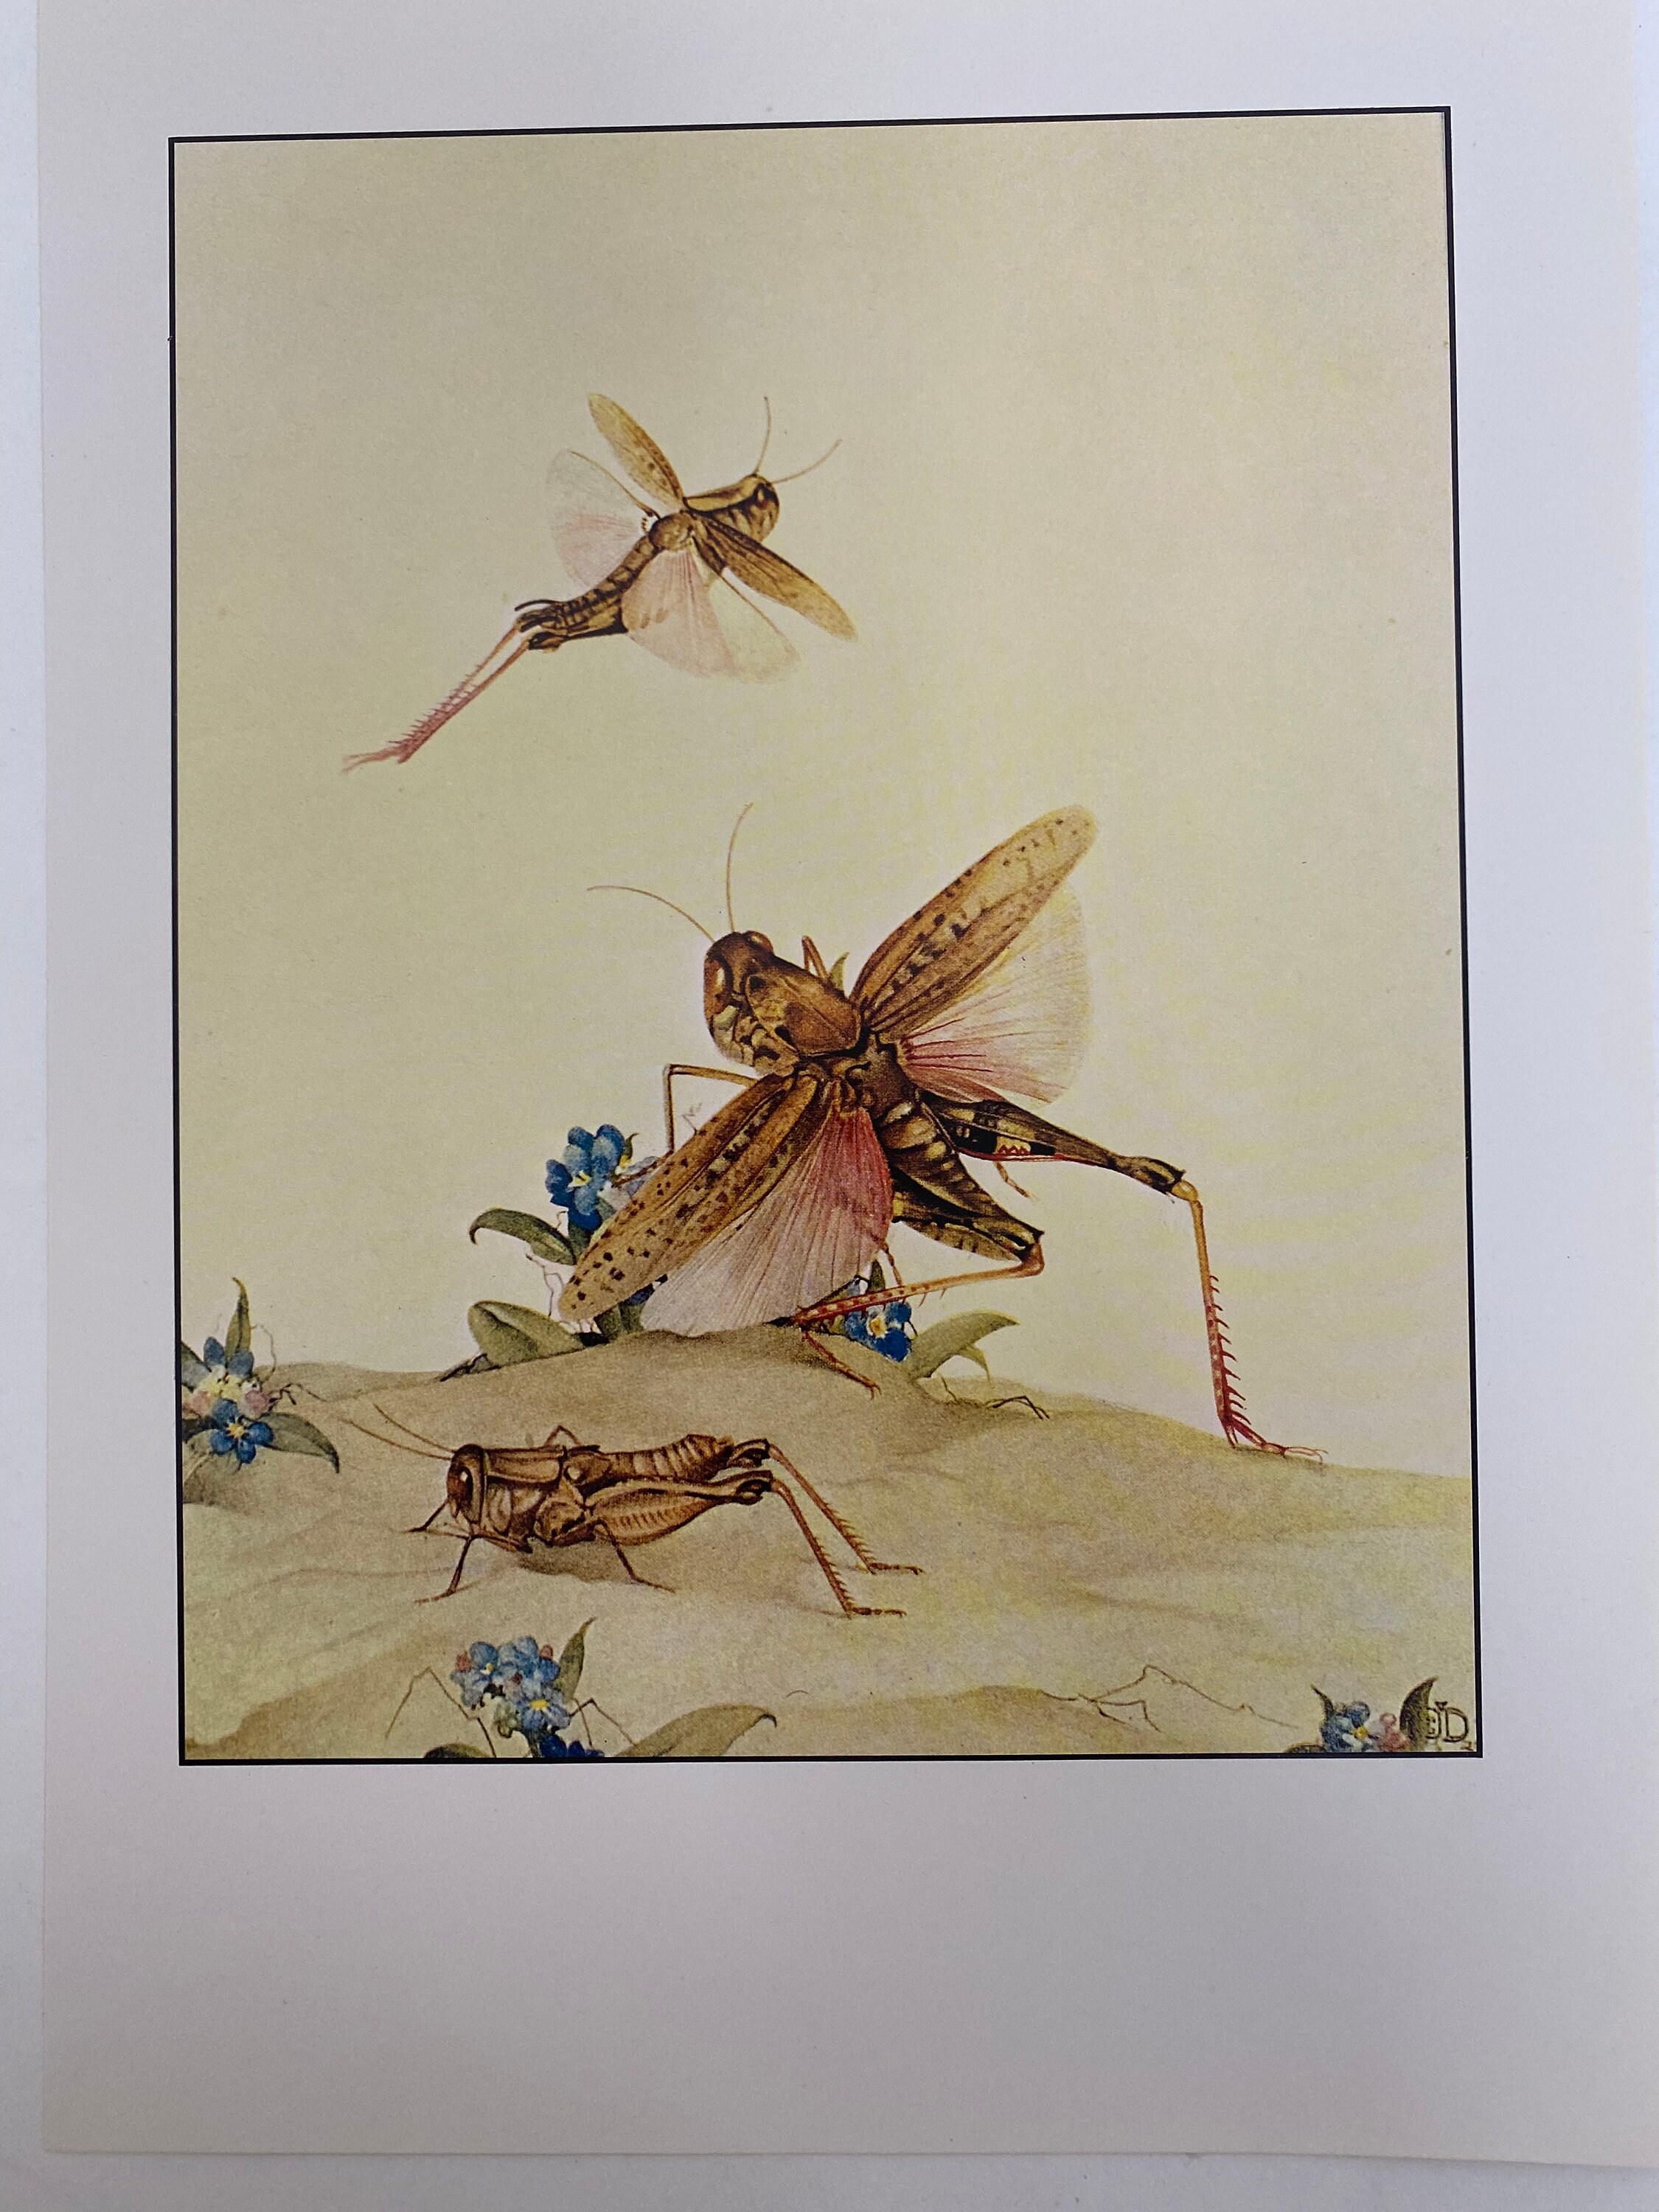 Etsy　Locusts　Book　Of　Julius　Edward　Insects　Fabres　Italian　日本